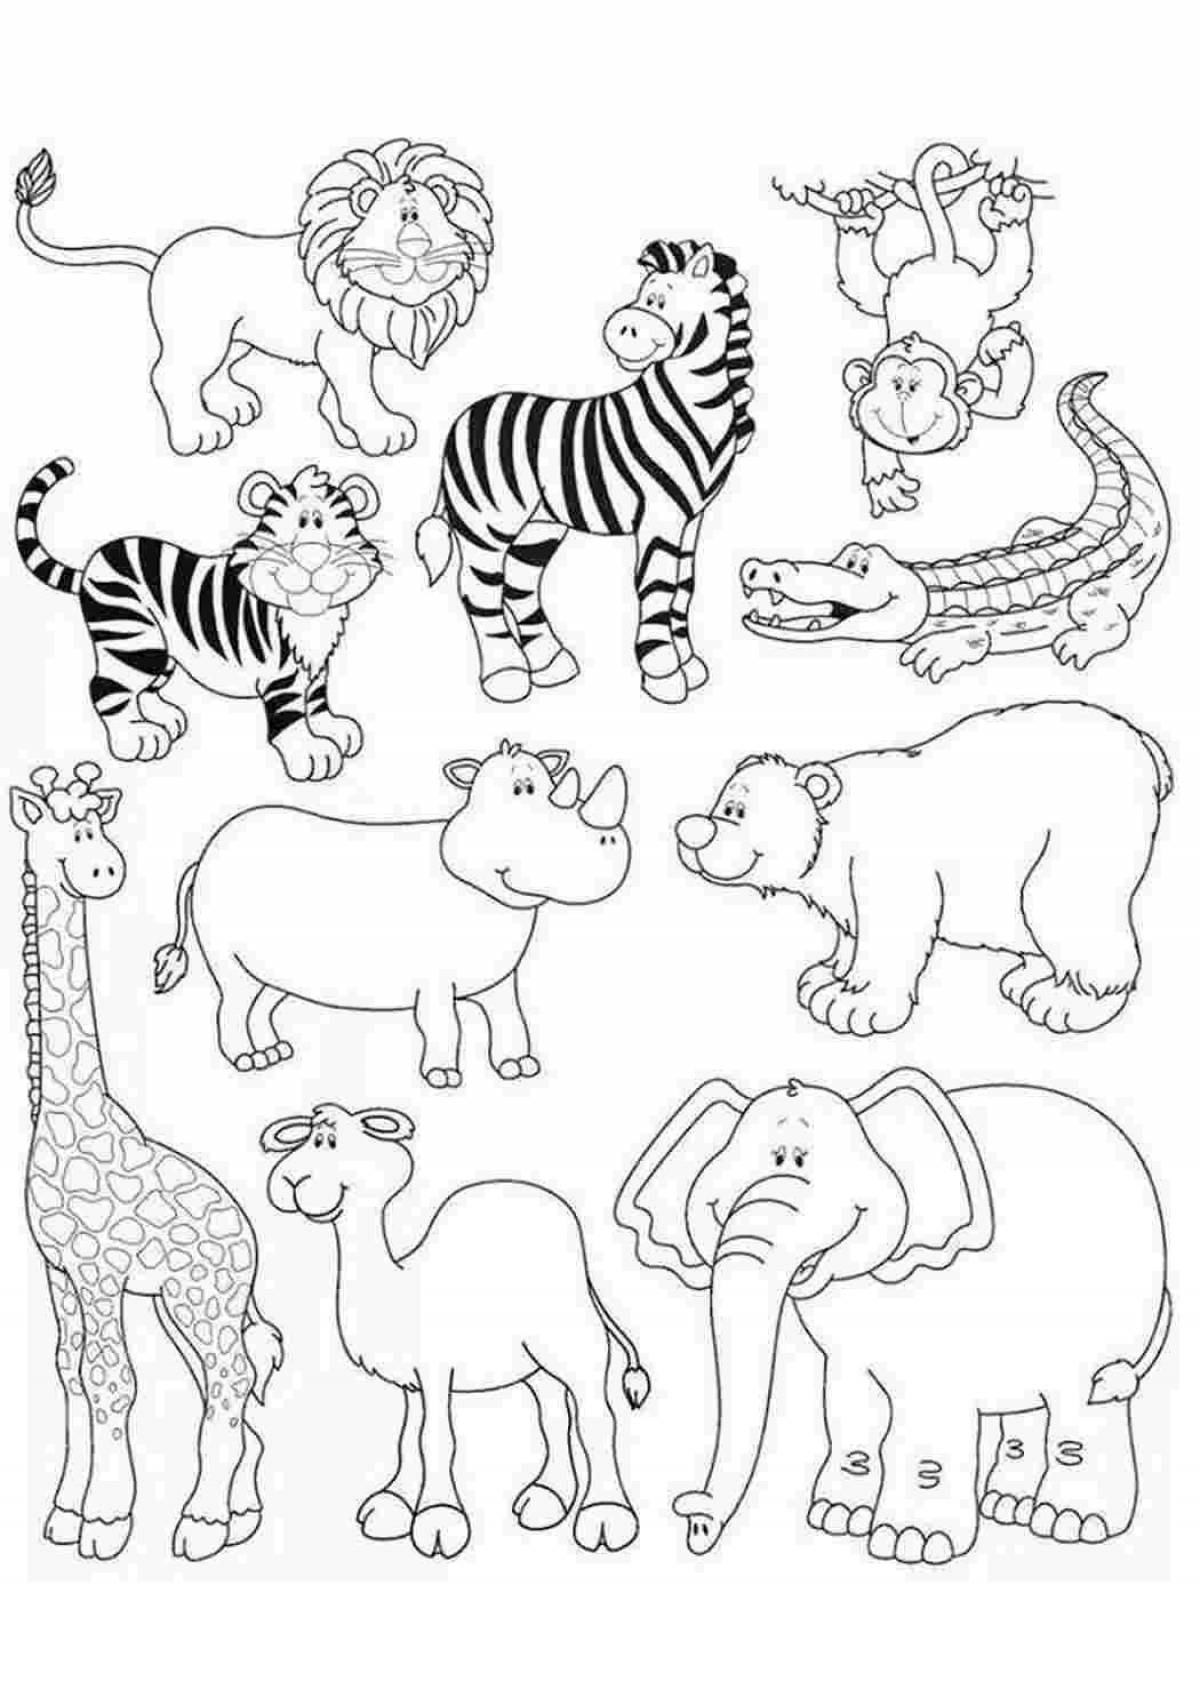 Animals playful coloring for children 6-7 years old